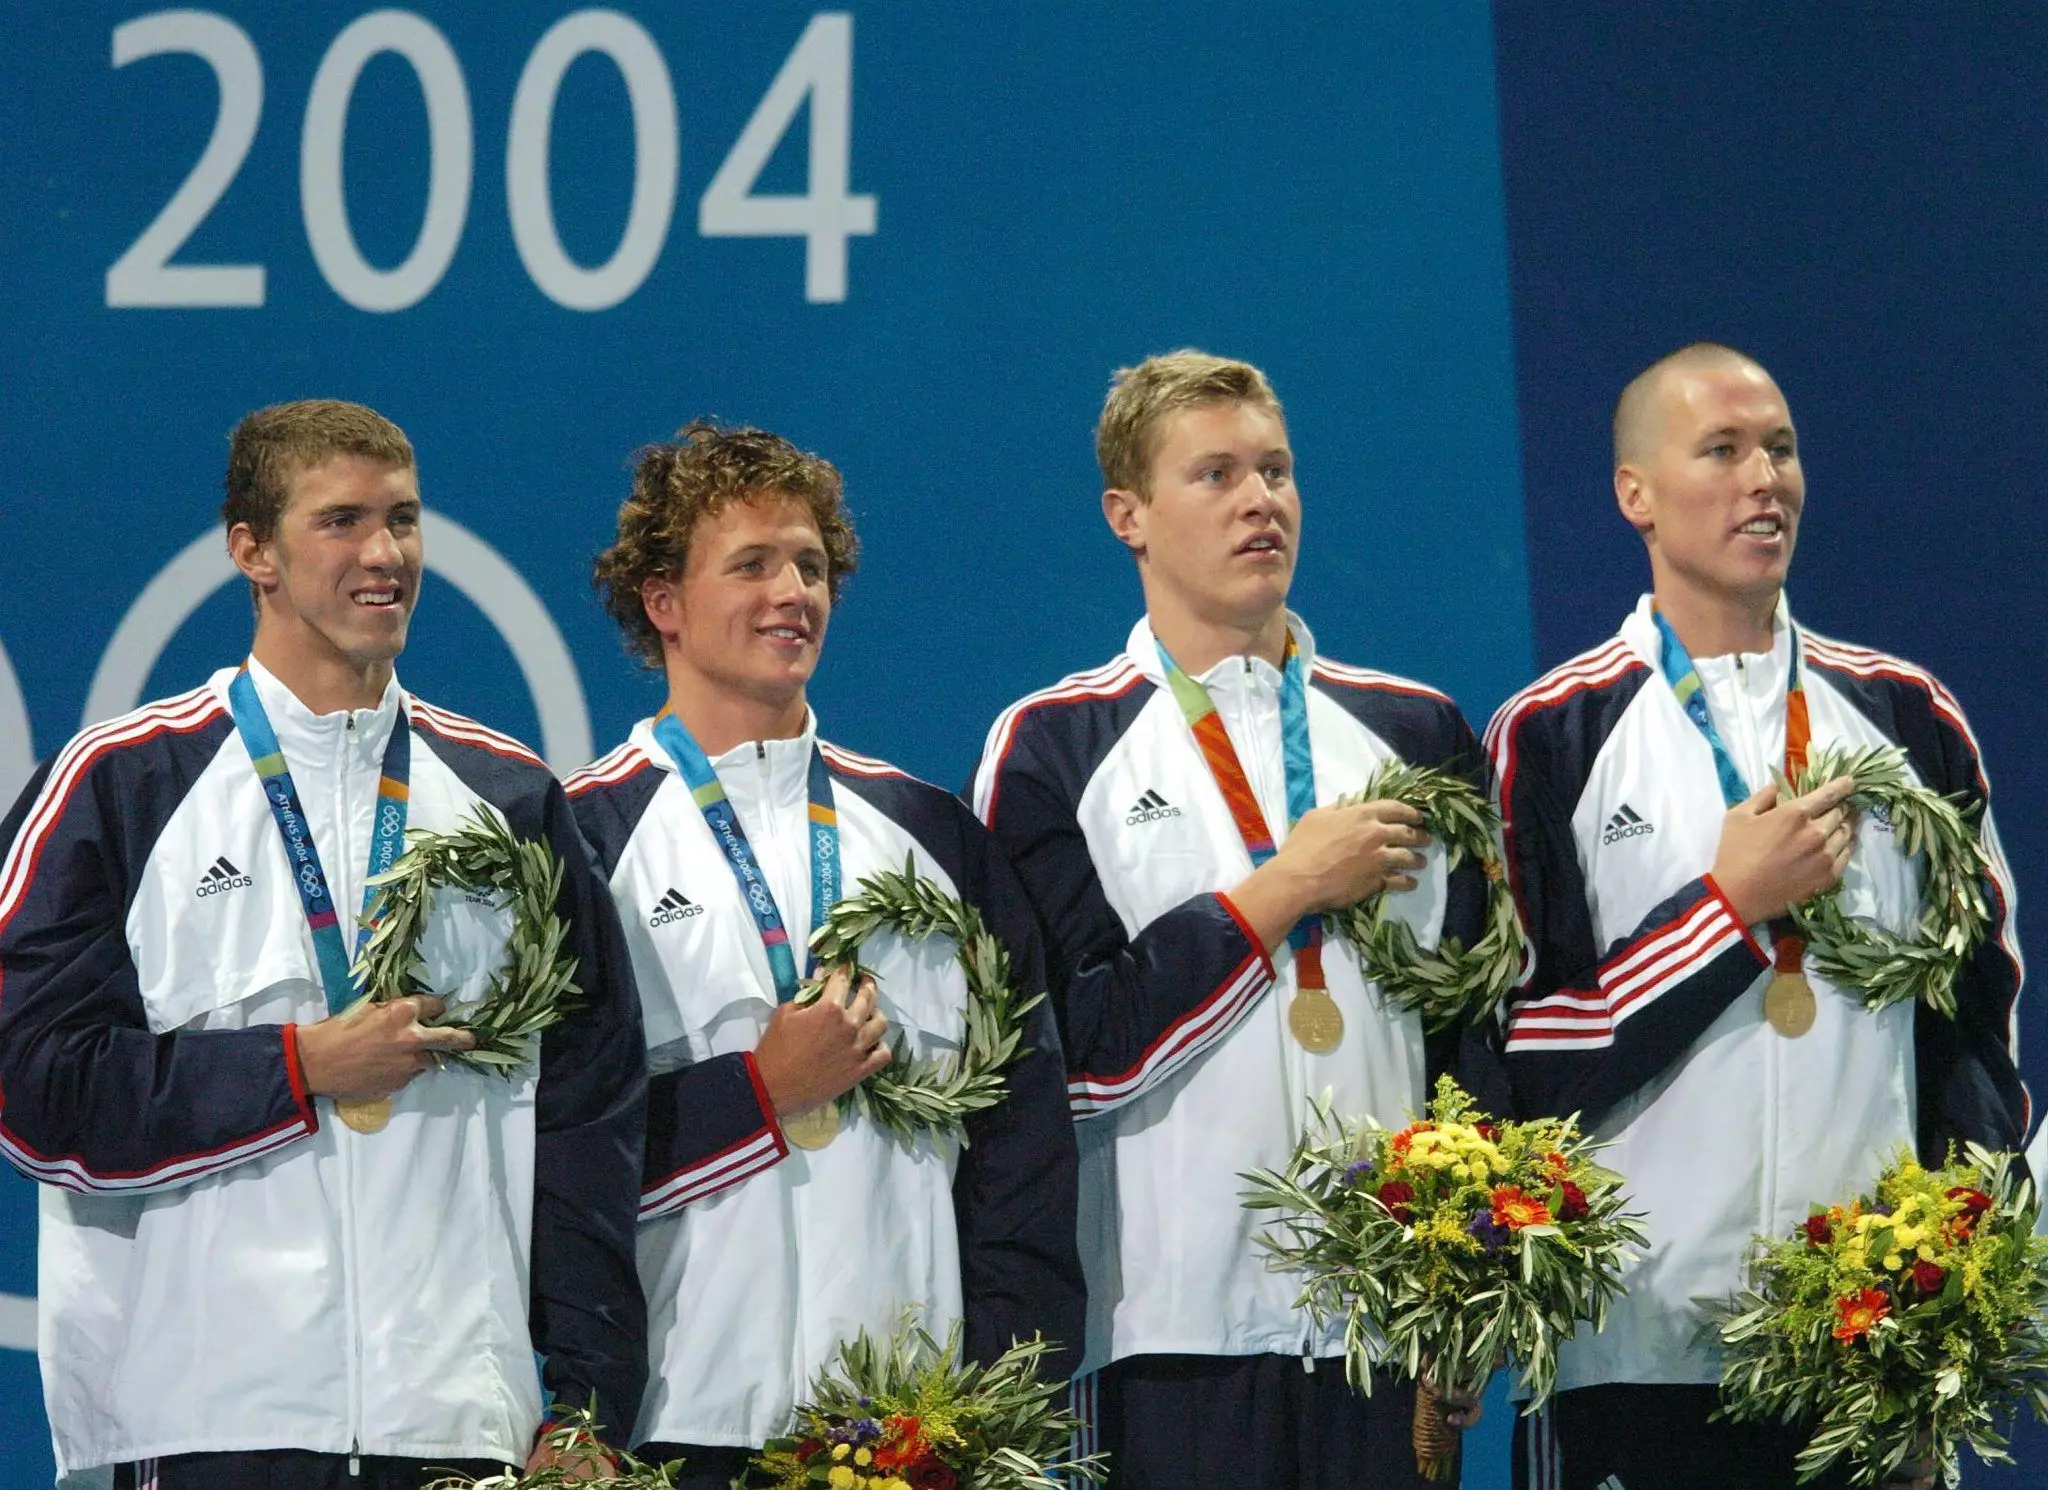 The men's swimming team that represented the US at Athens.